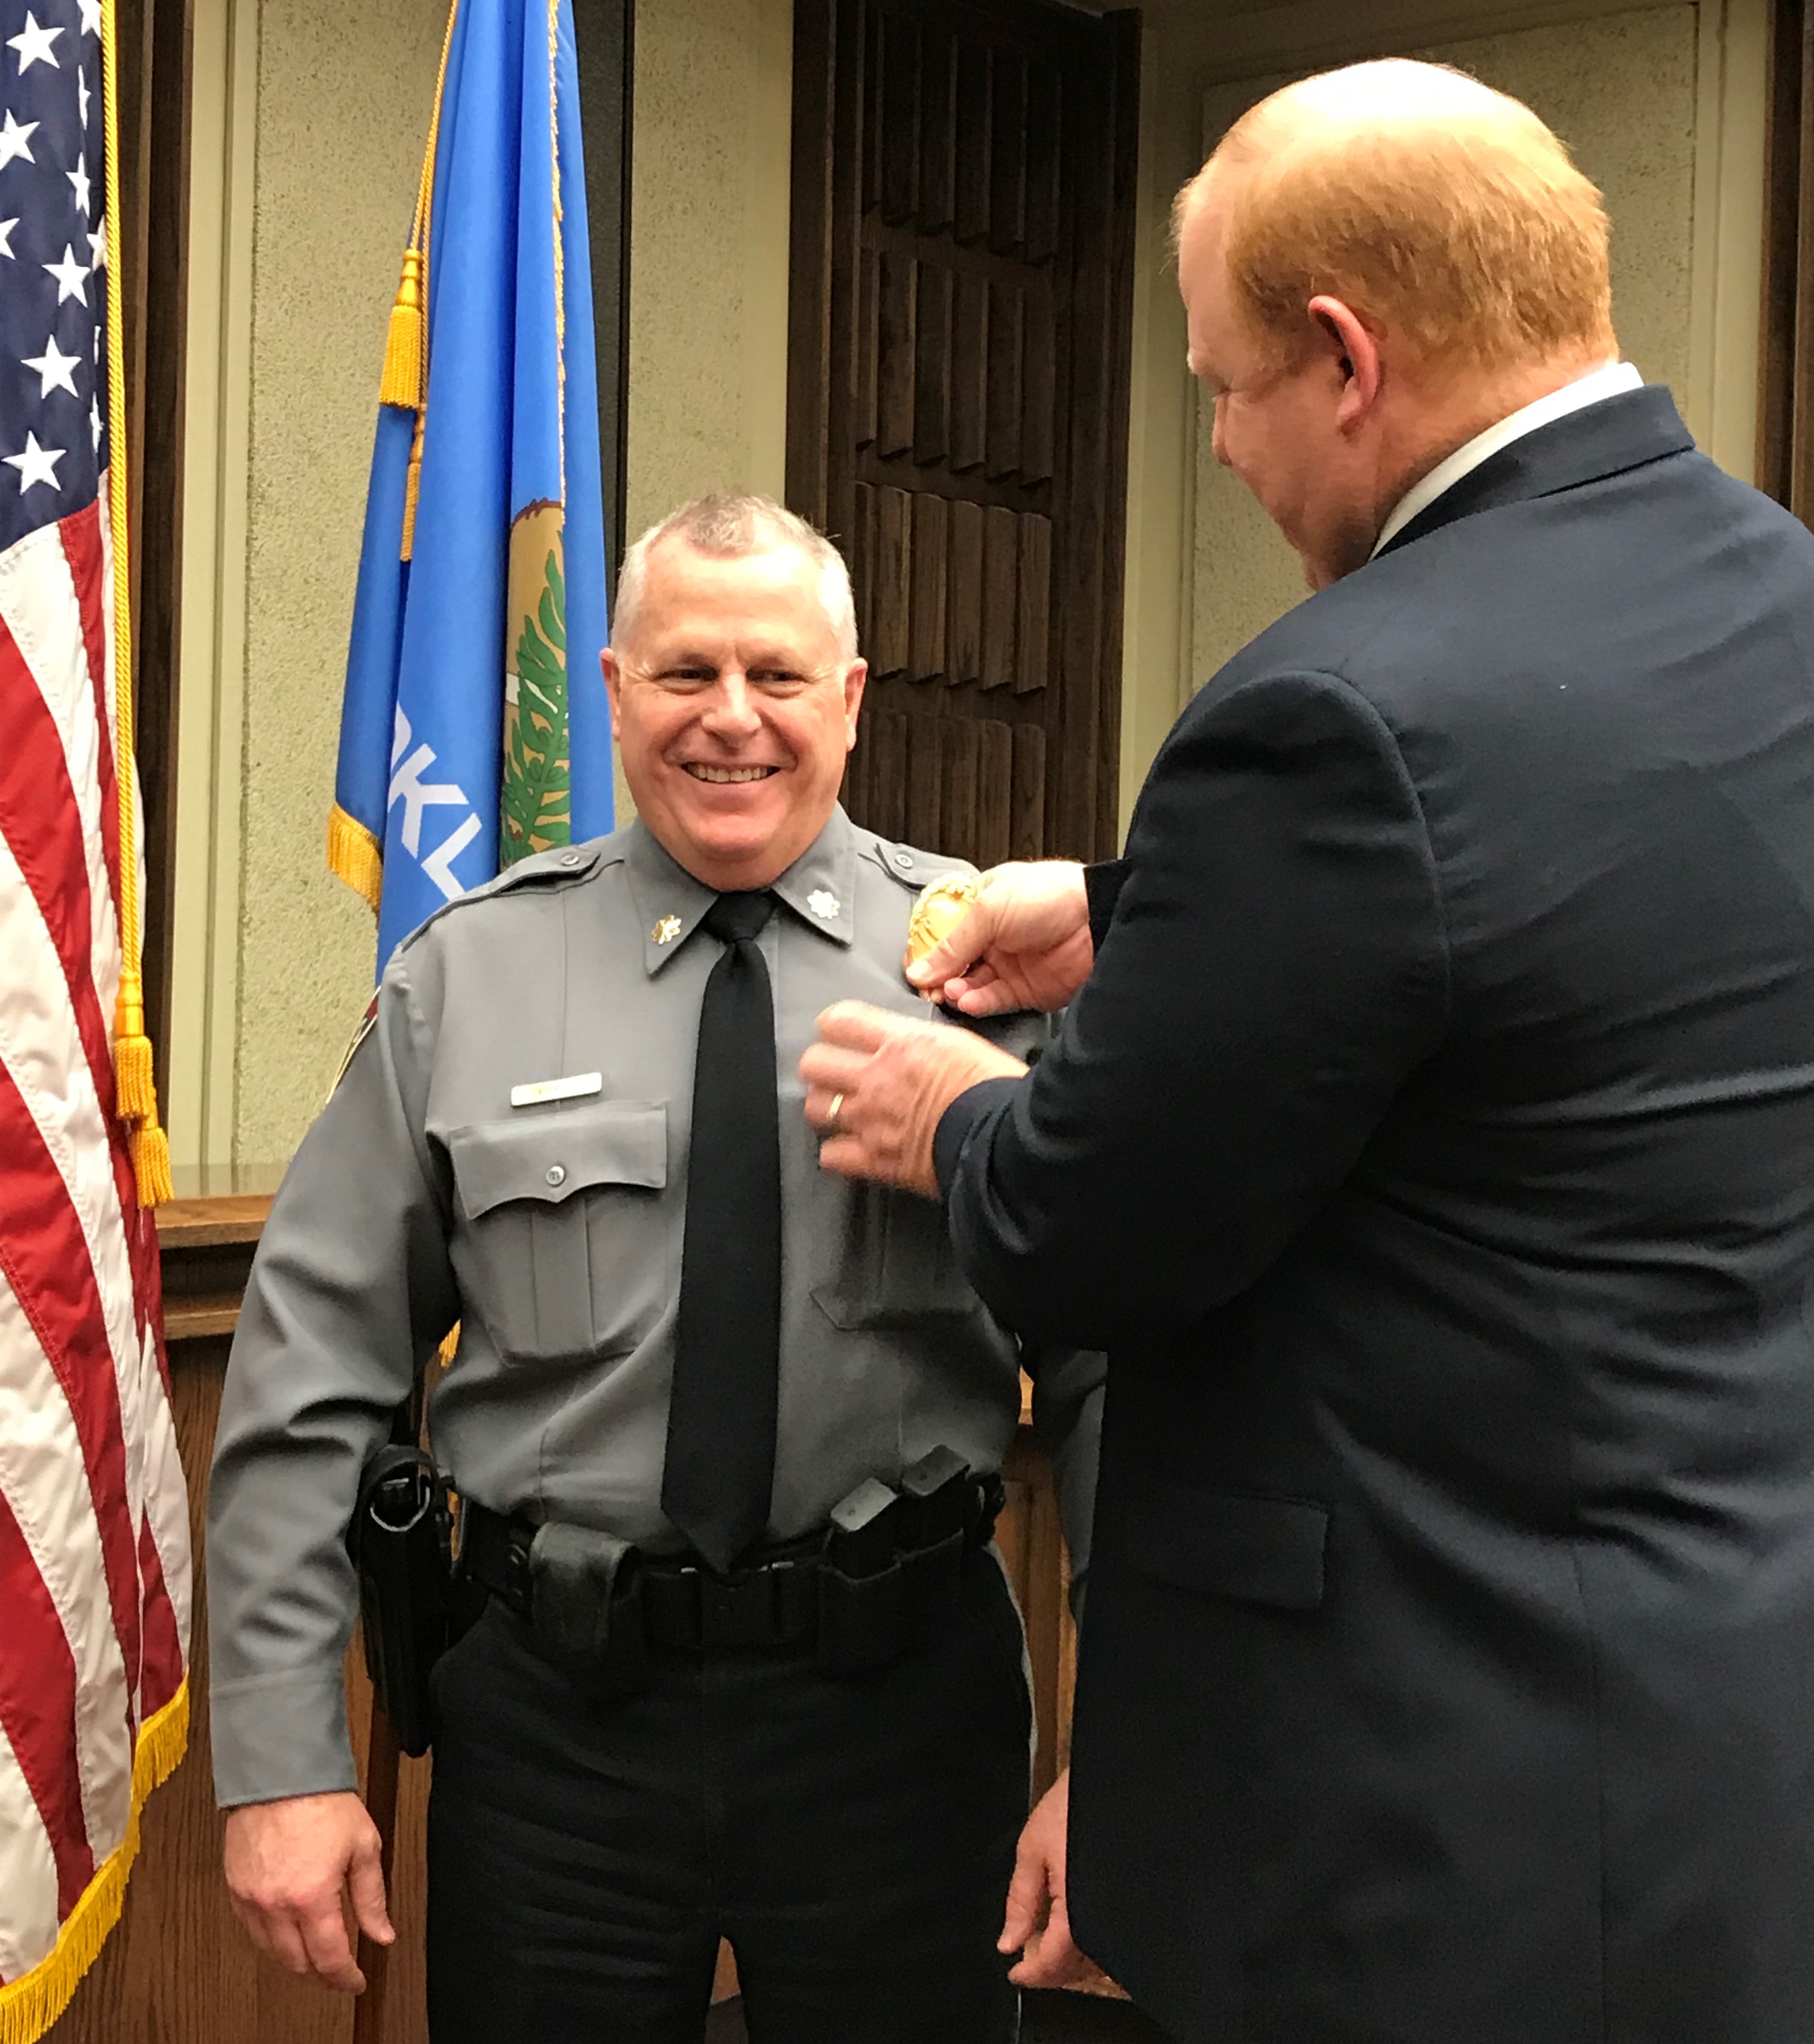 Richard Evans becomes Deputy Chief of Police